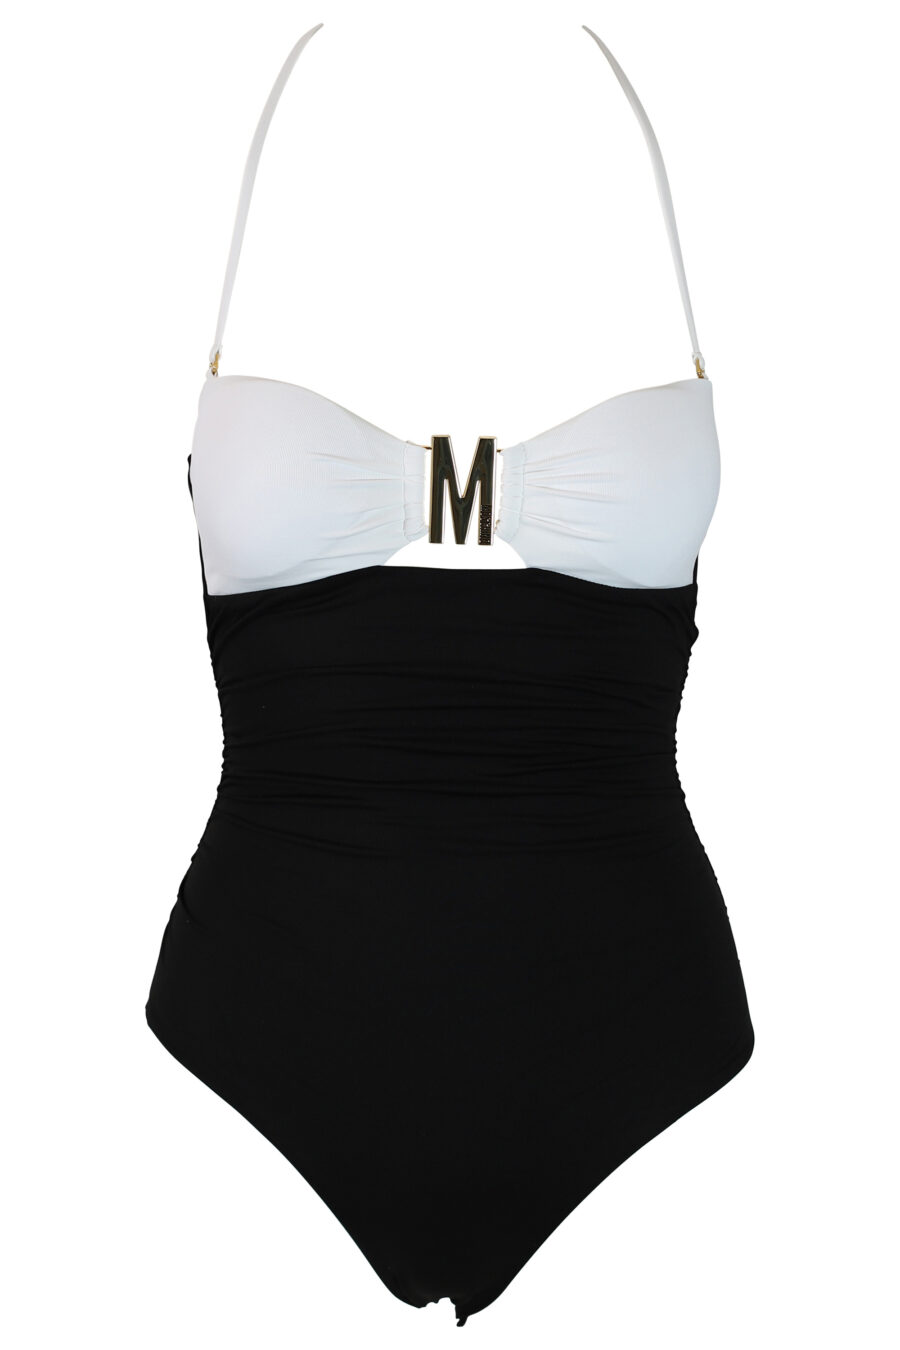 Bicolour swimming costume with gold lettering - 889316258318